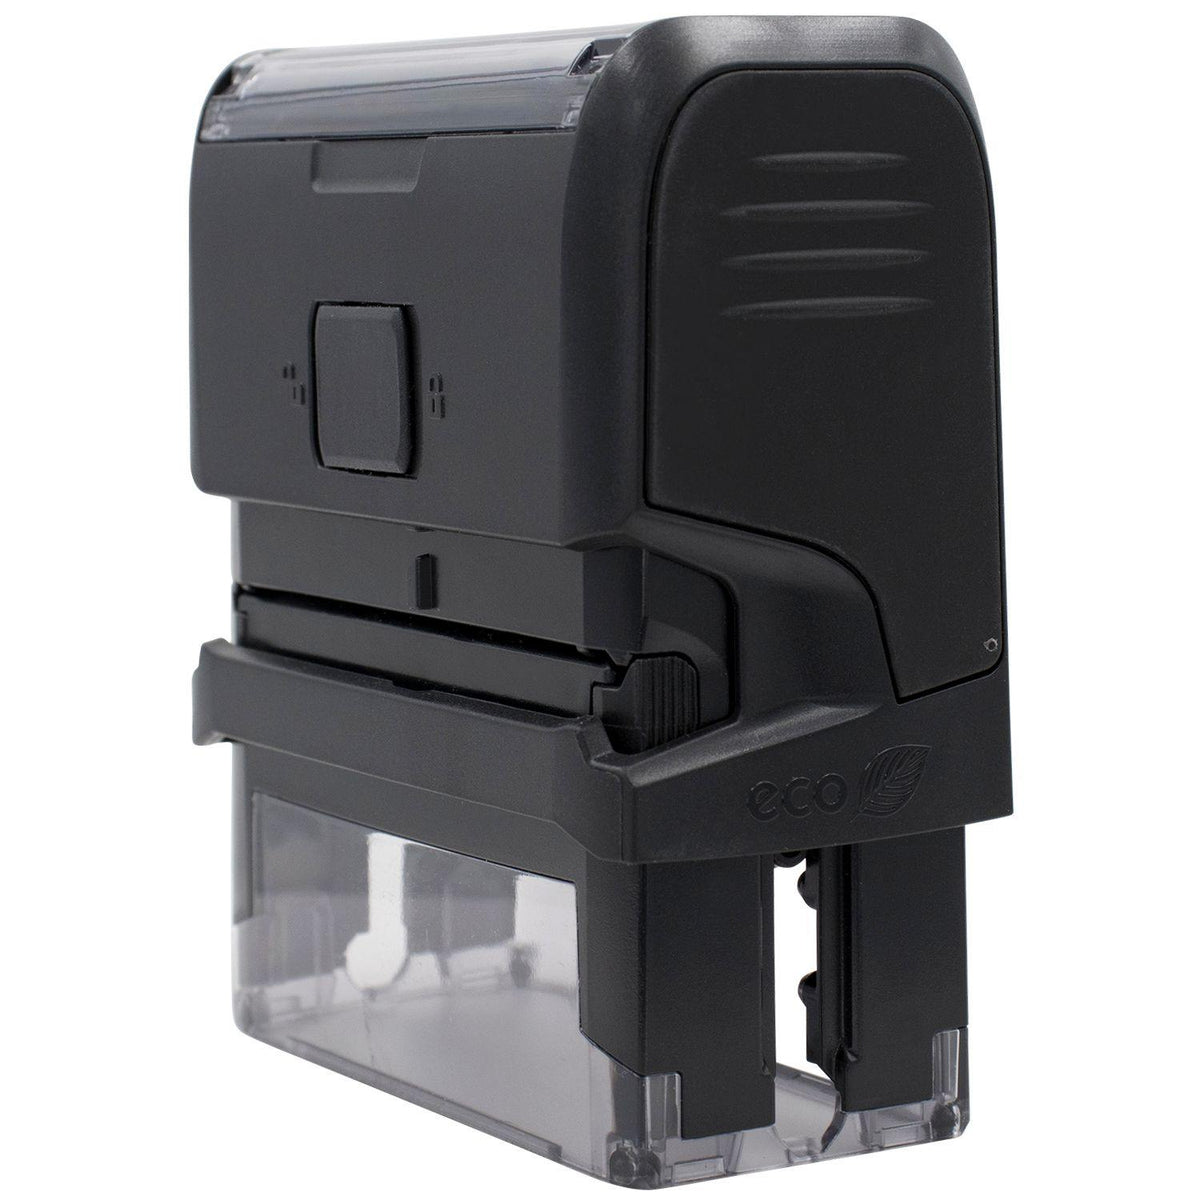 Side View of Large Self Inking Client Copy Stamp at an Angle